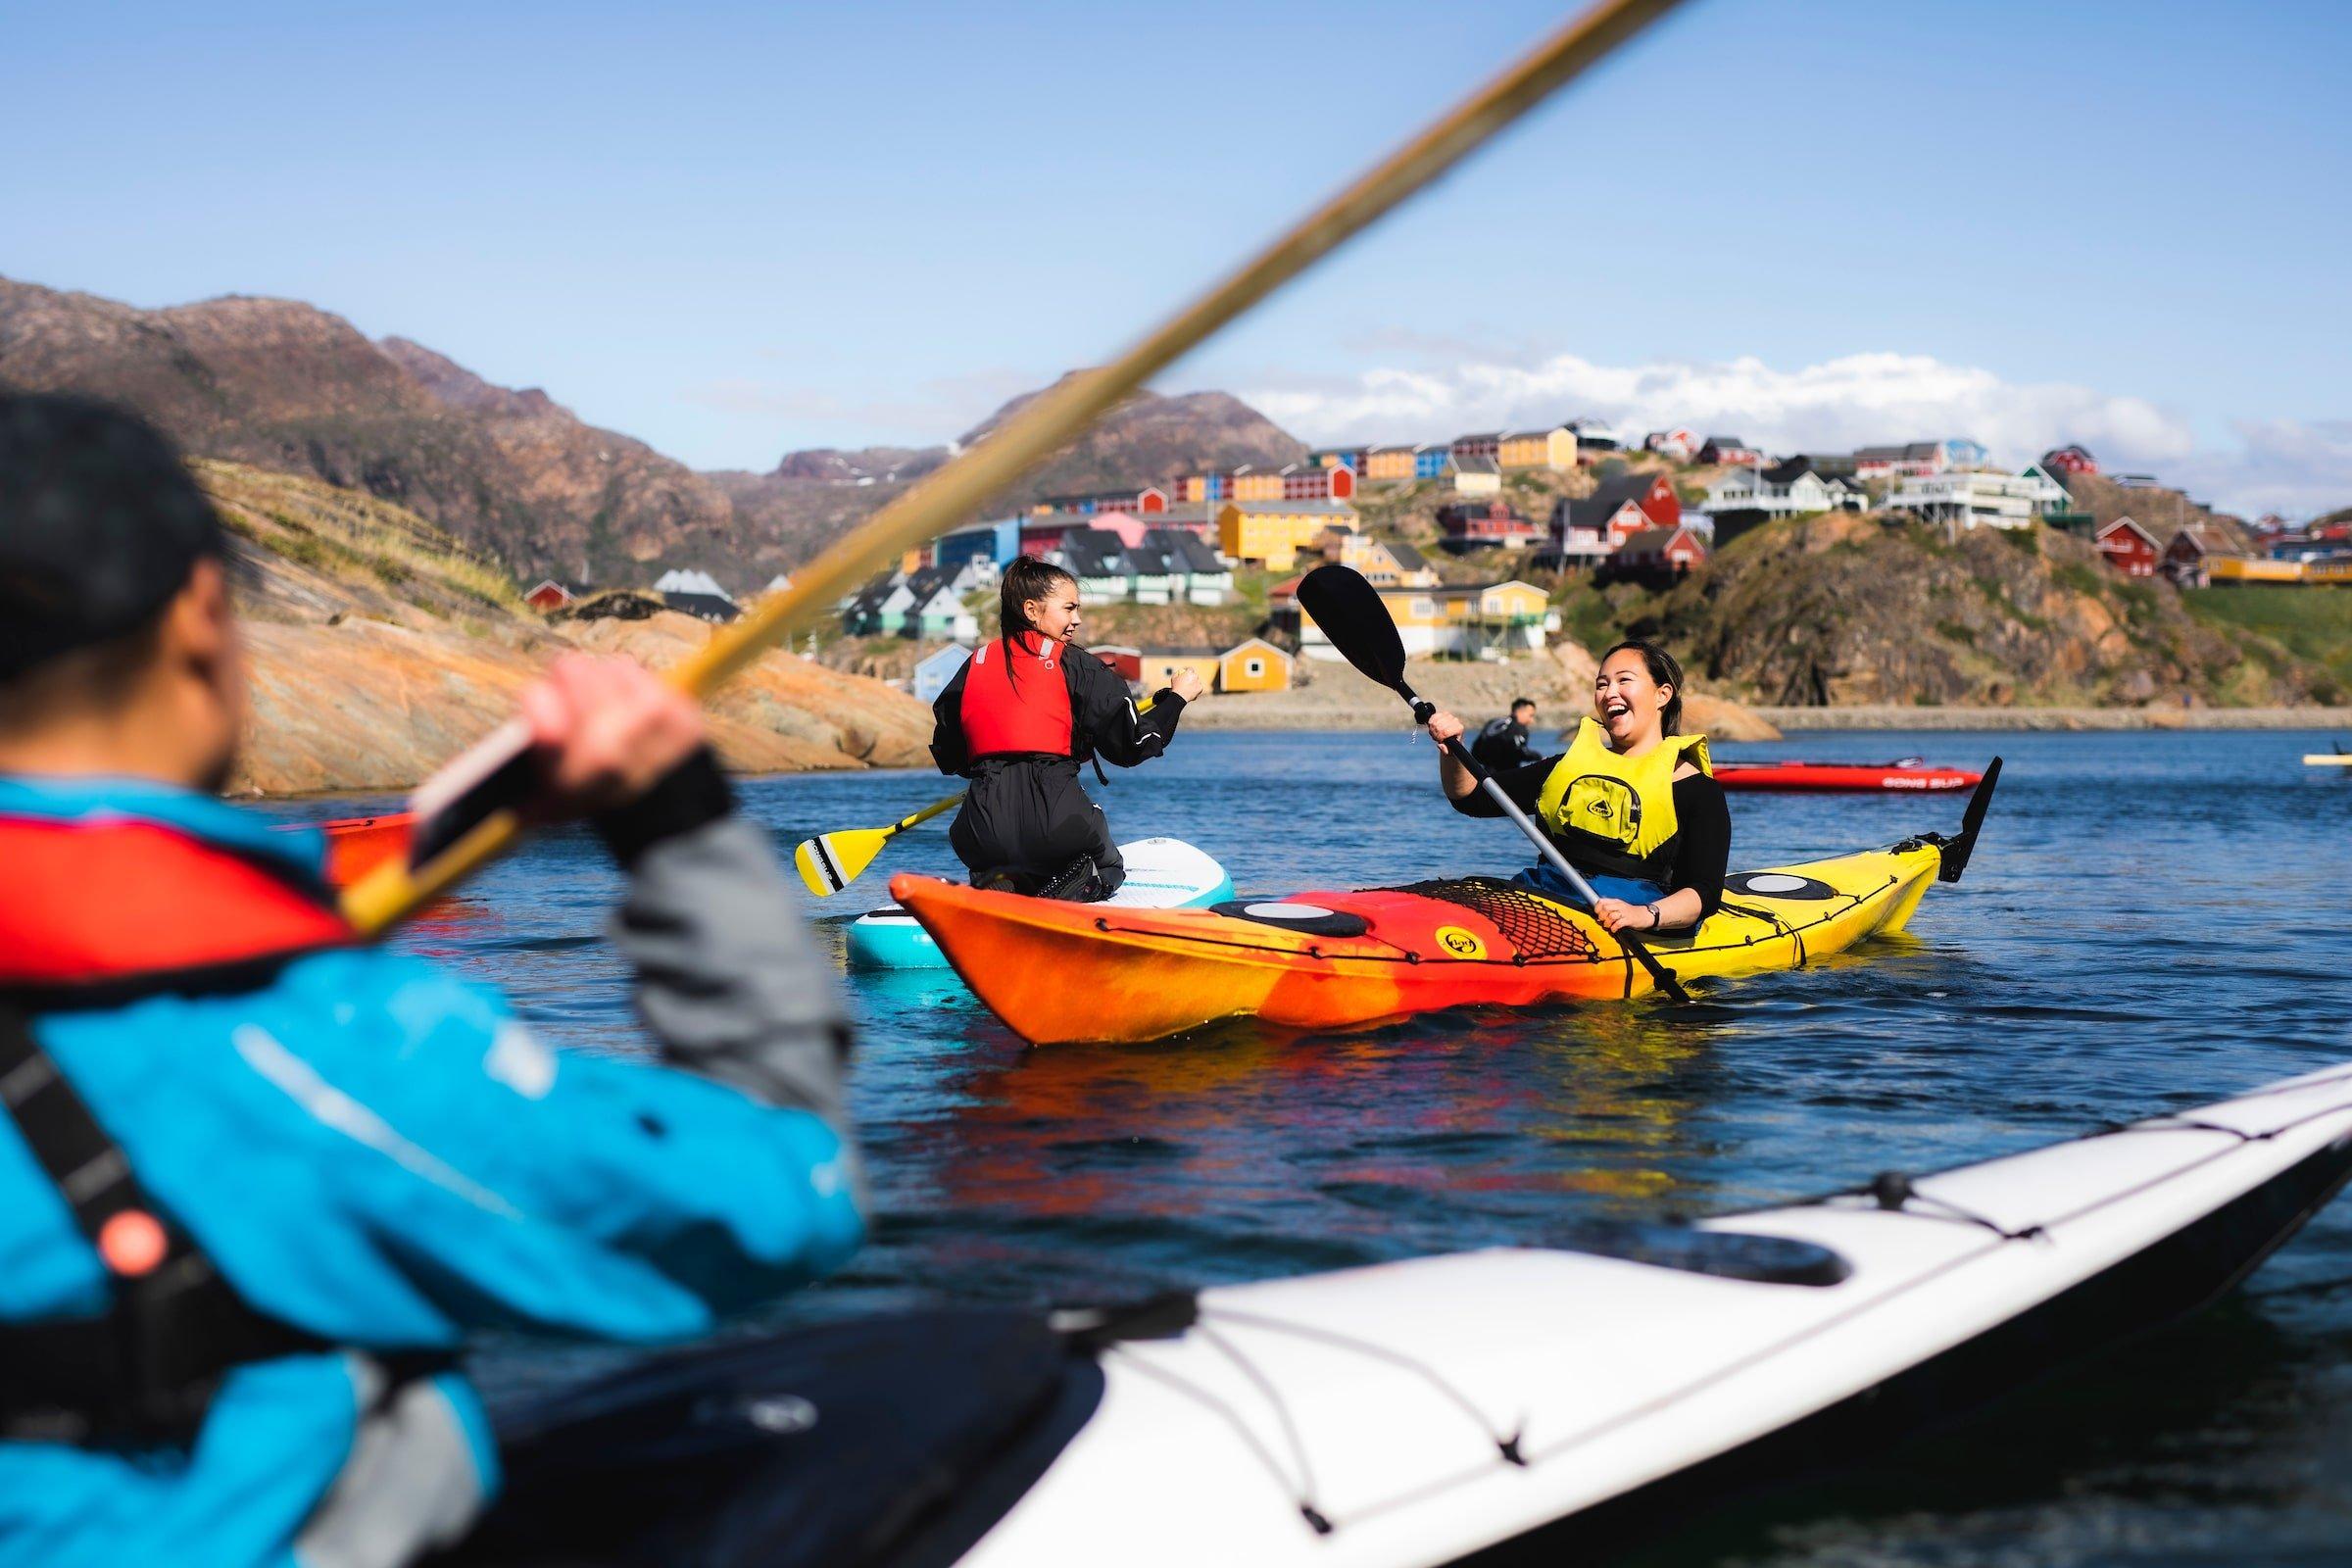 Kayaking in Sisimiut is one of the town's top activities. Photo: Aningaaq R Carlsen